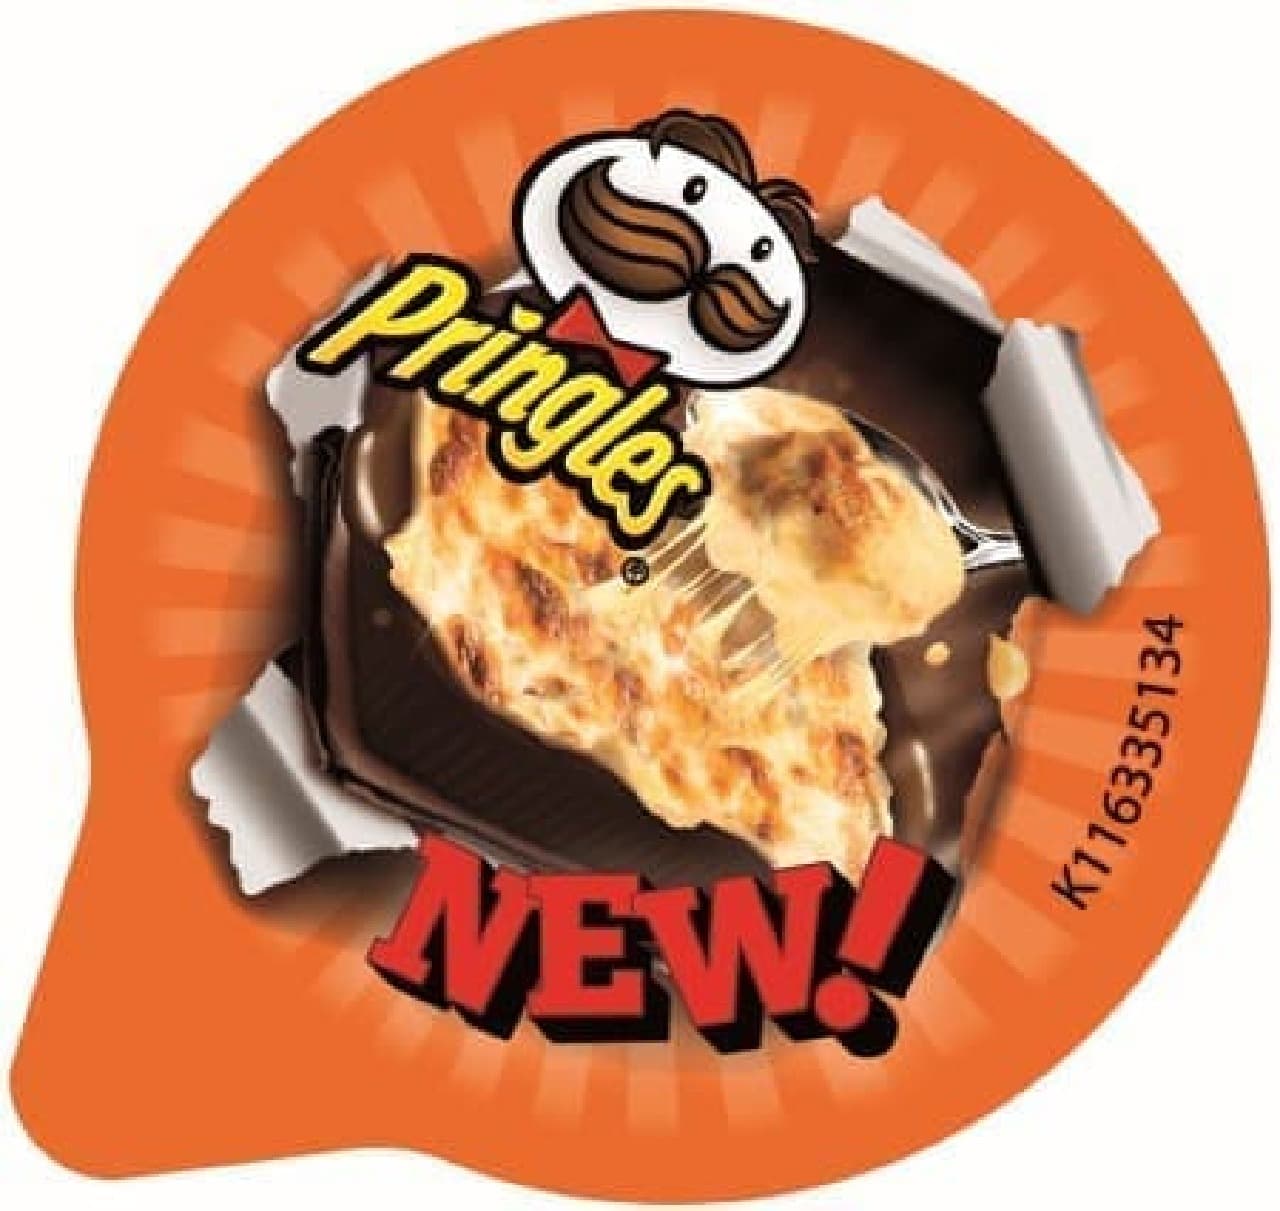 From the potato chips "Pringles", a new flavor "Cheese gratin" limited to autumn and winter